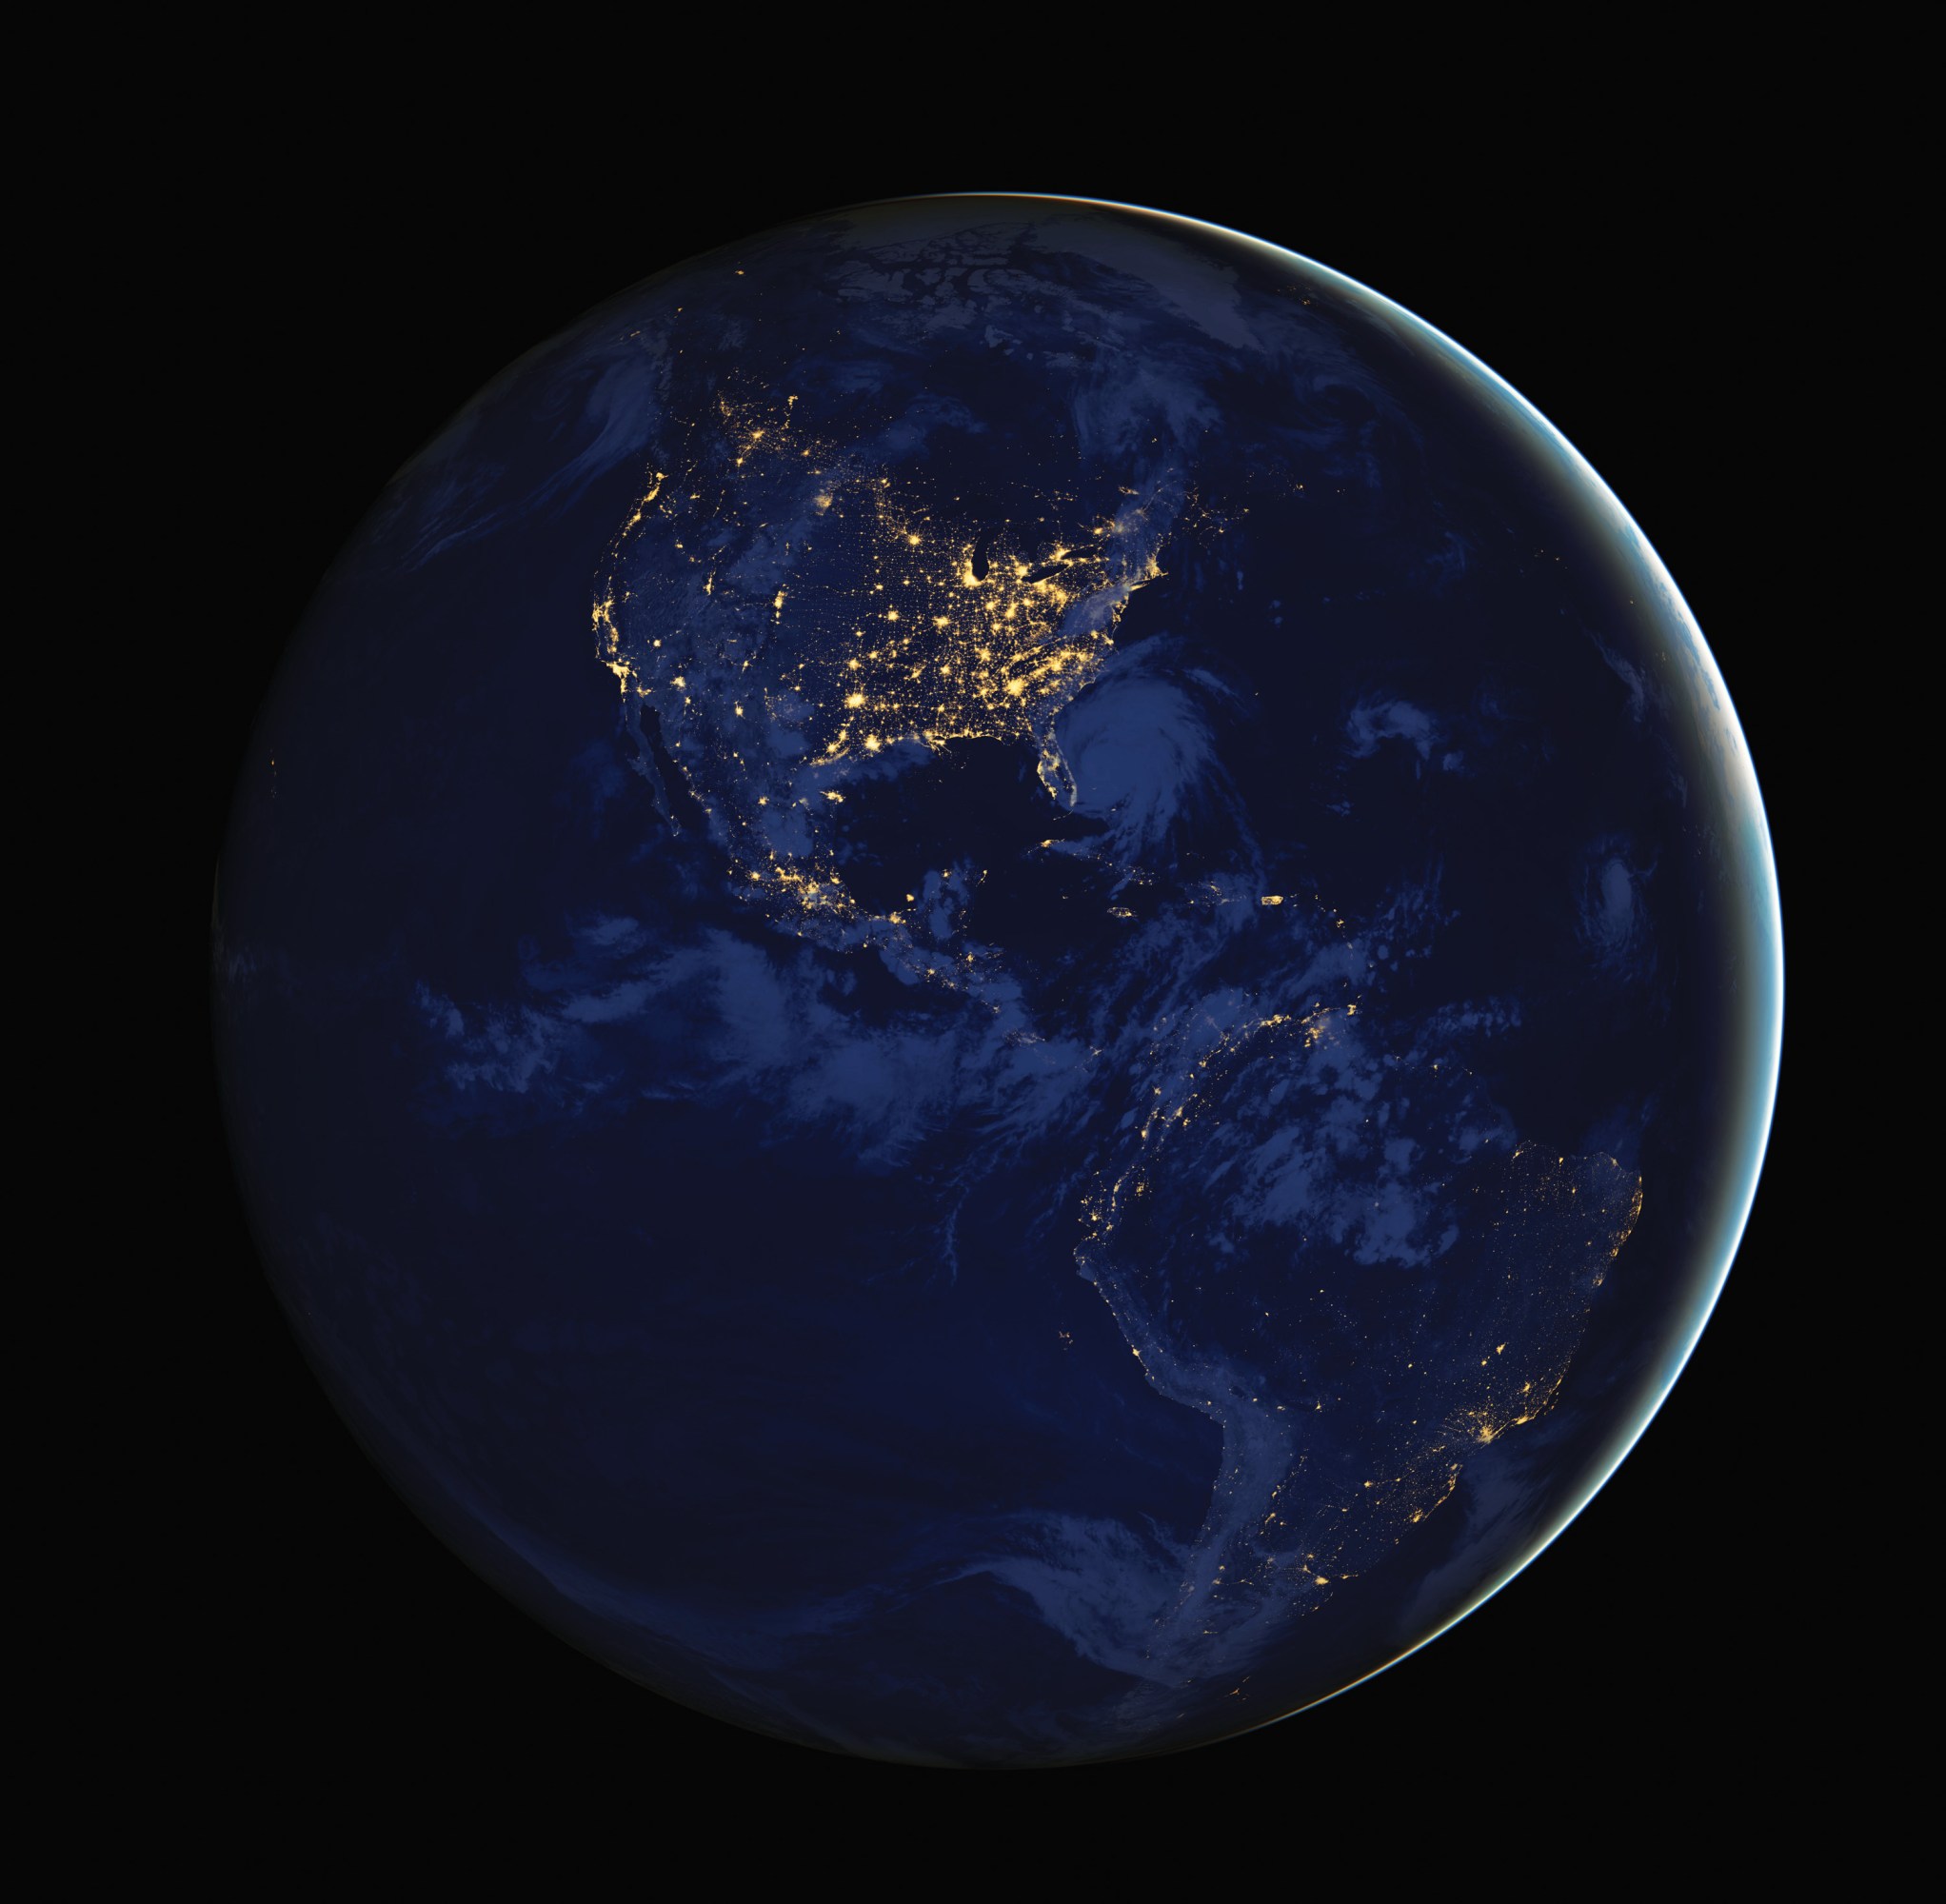 satellite view of Earth in hemisphere away from sun with visible city lights